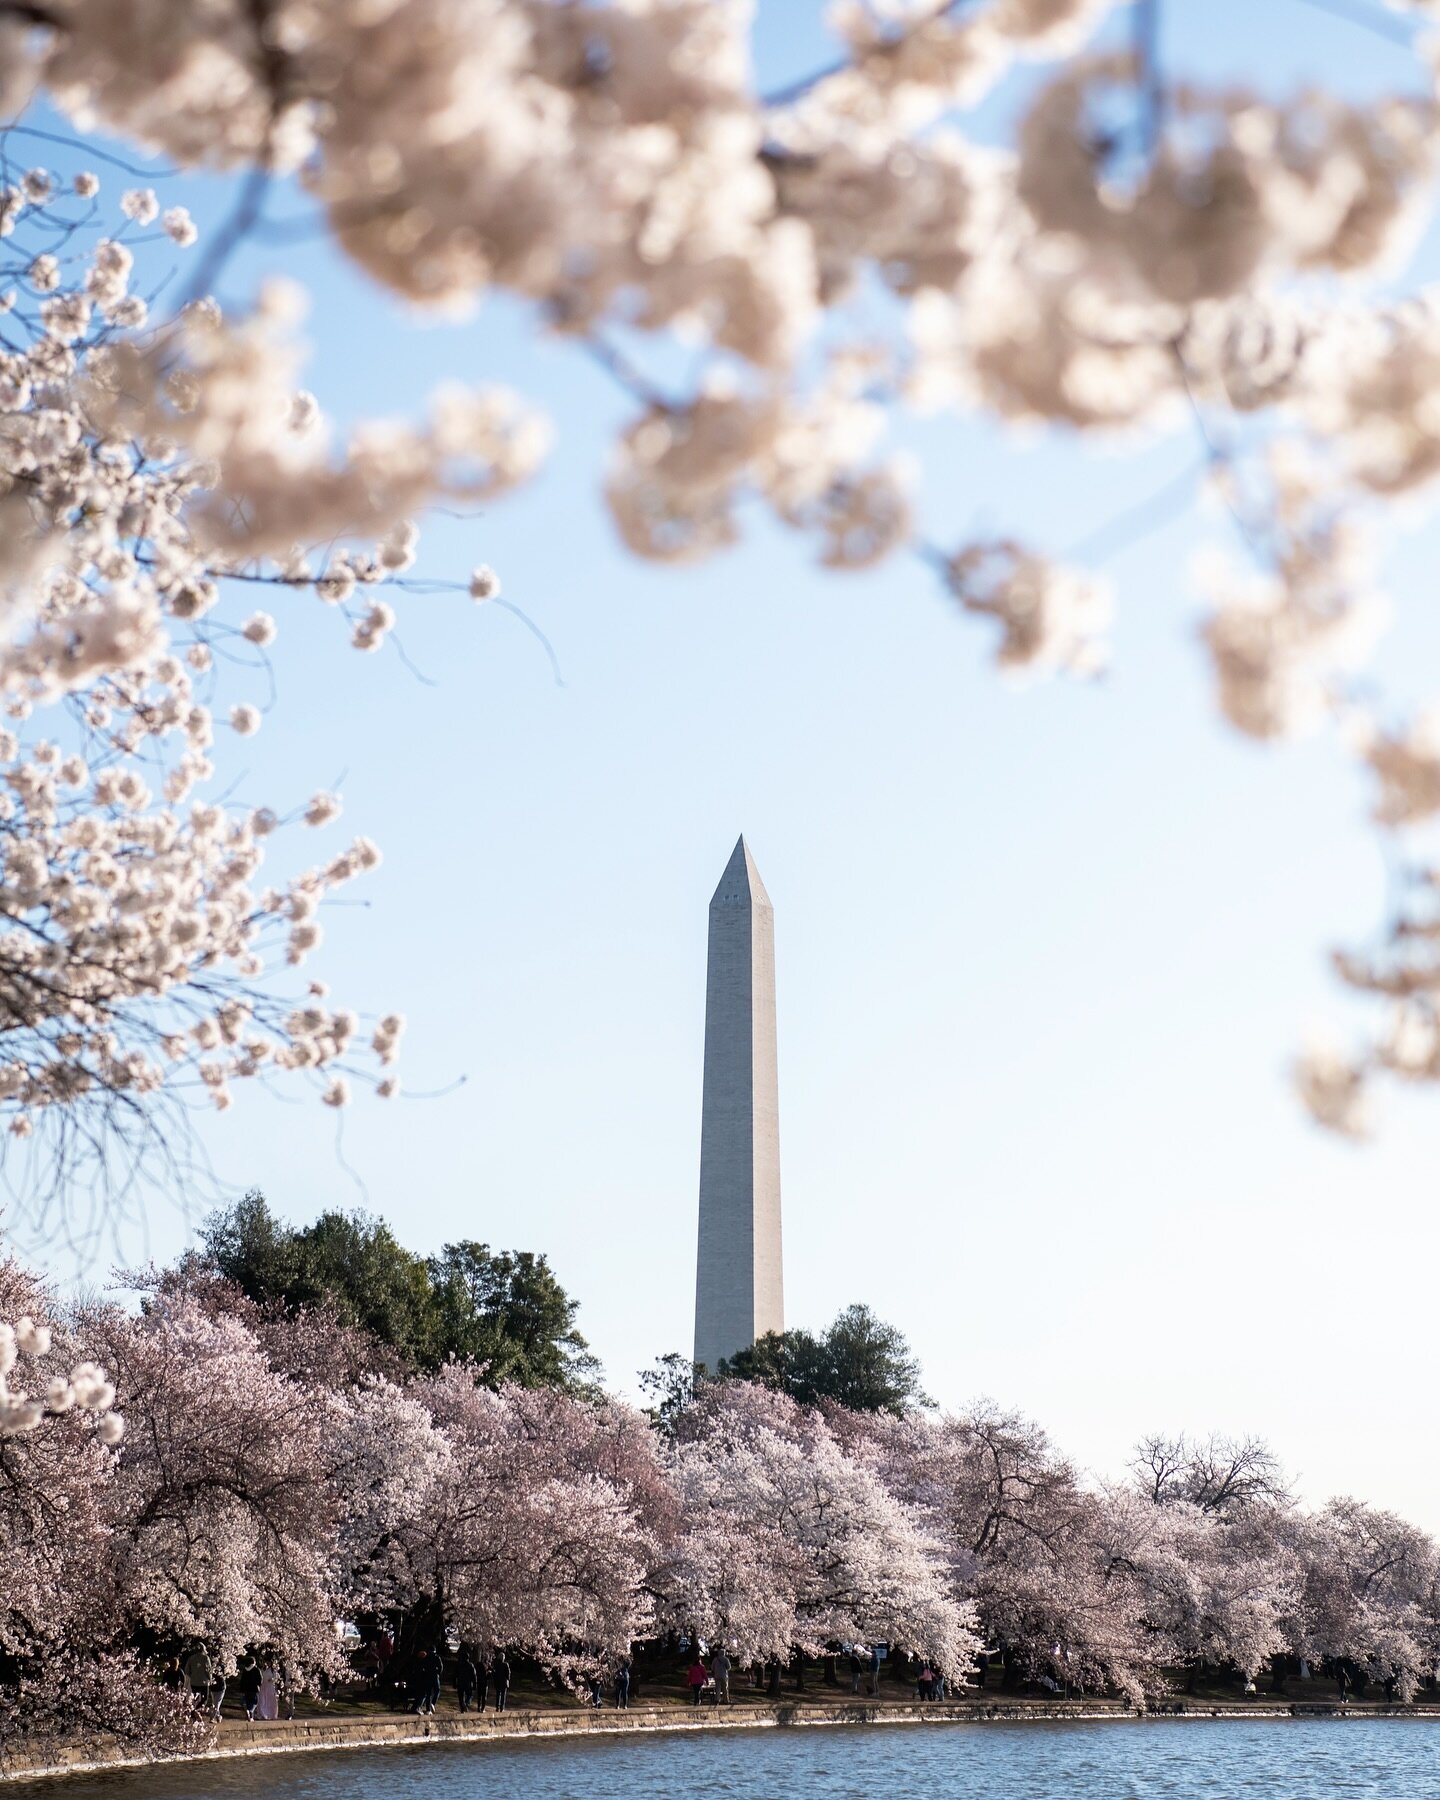 It&rsquo;s that time of year again when I get really into flowers and trees! 🌸 this time, in DC. So happy to be back in this area after so many years away. The cherry blossoms are just as beautiful as I remember.